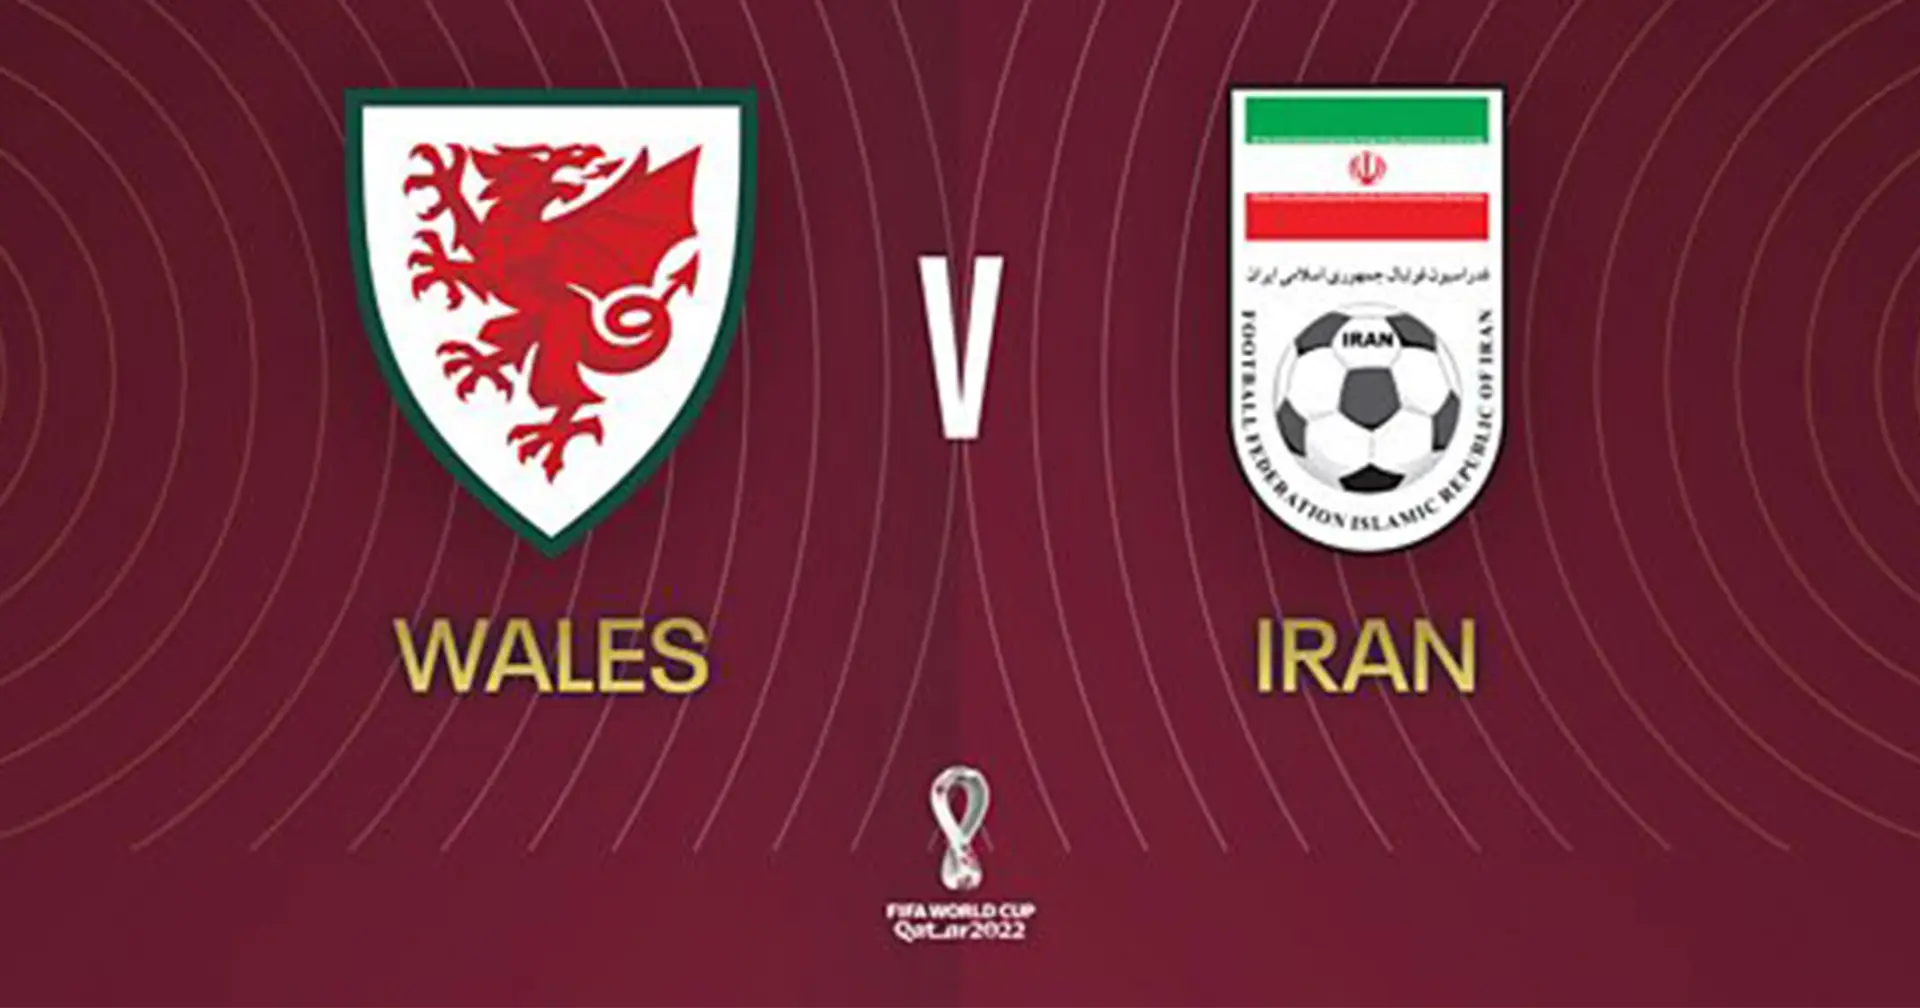 Wales v Iran: Official team lineups for the World Cup clash revealed